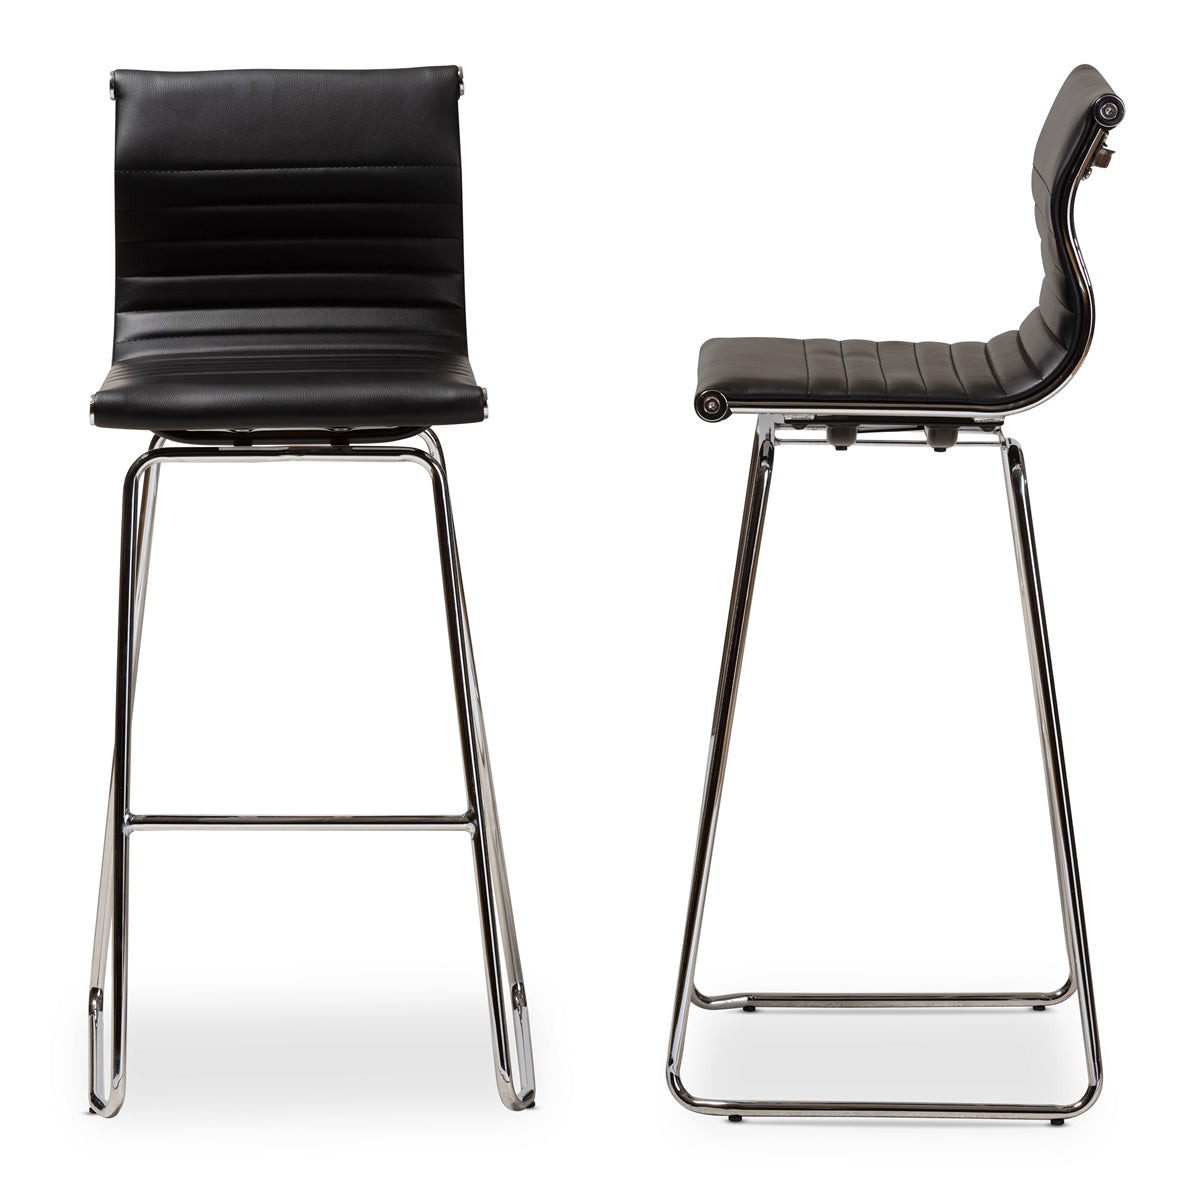 Baxton Studio Giorgio Modern and Contemporary Black Faux Leather Upholstered Chrome-Finished Steel Bar Stool Set Baxton Studio-Bar Stools-Minimal And Modern - 3